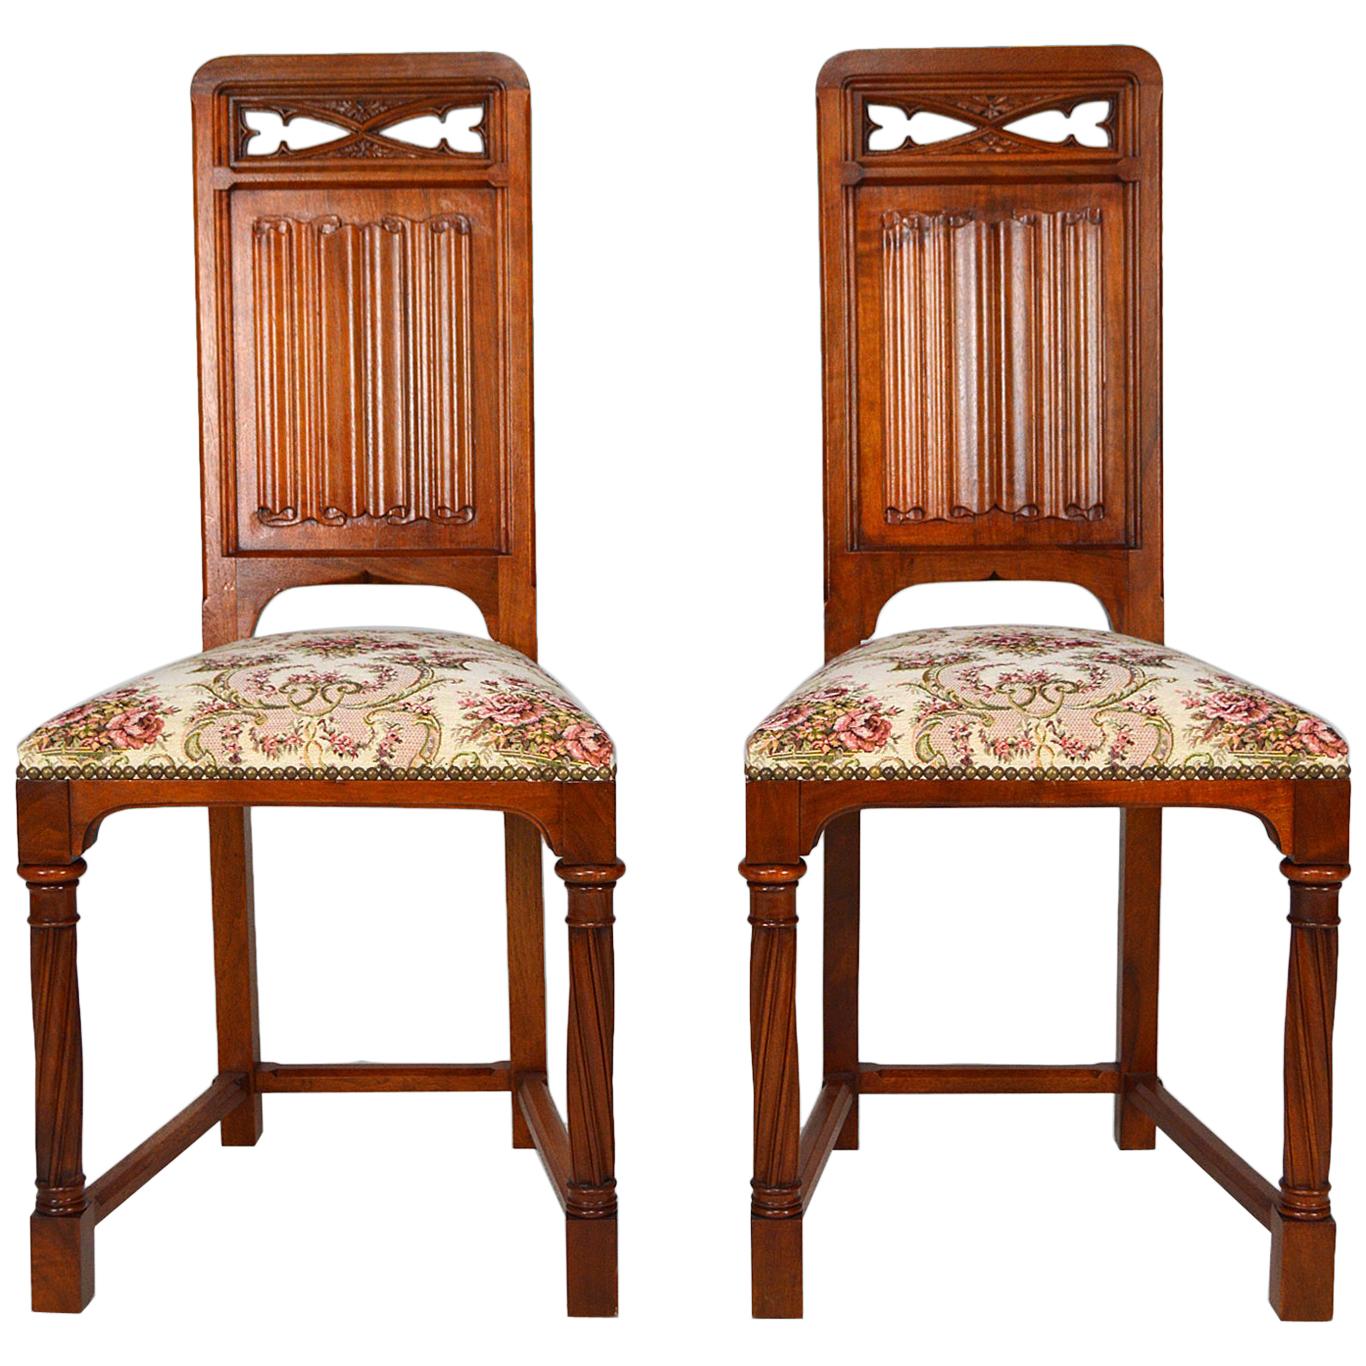 Pair of Antique Victorian Gothic Revival Chairs in Carved Walnut, 19th Century For Sale